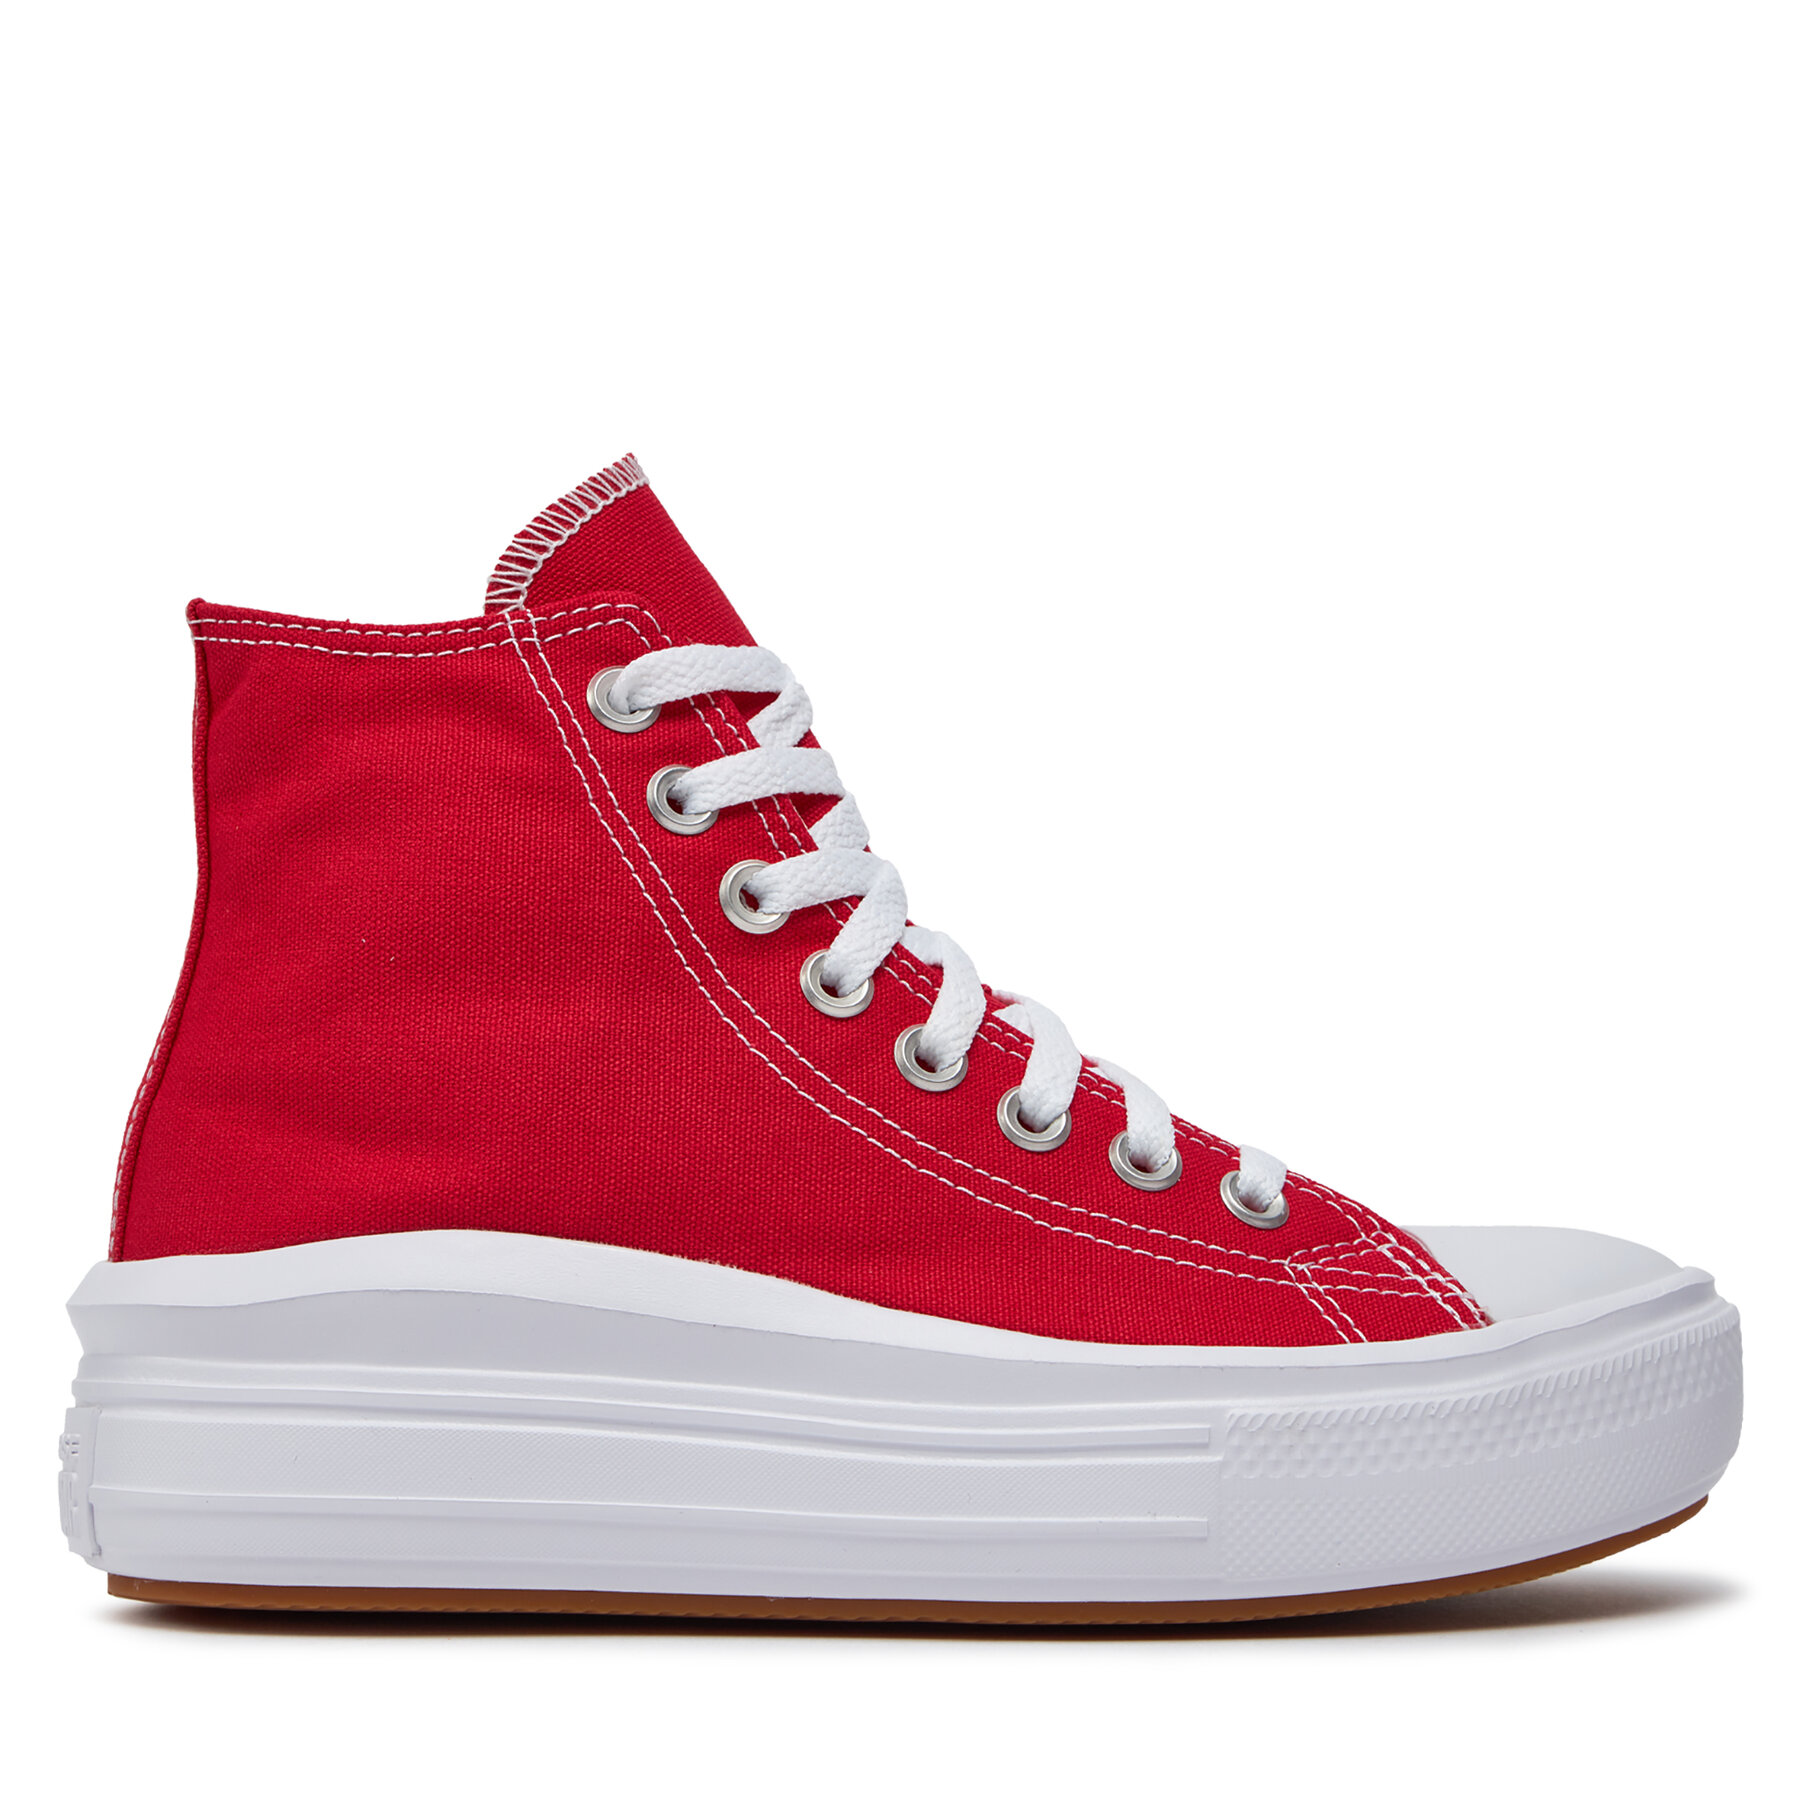 Sneakers aus Stoff Converse Chuck Taylor All Star Move A09073C Red/White/Gum von Converse